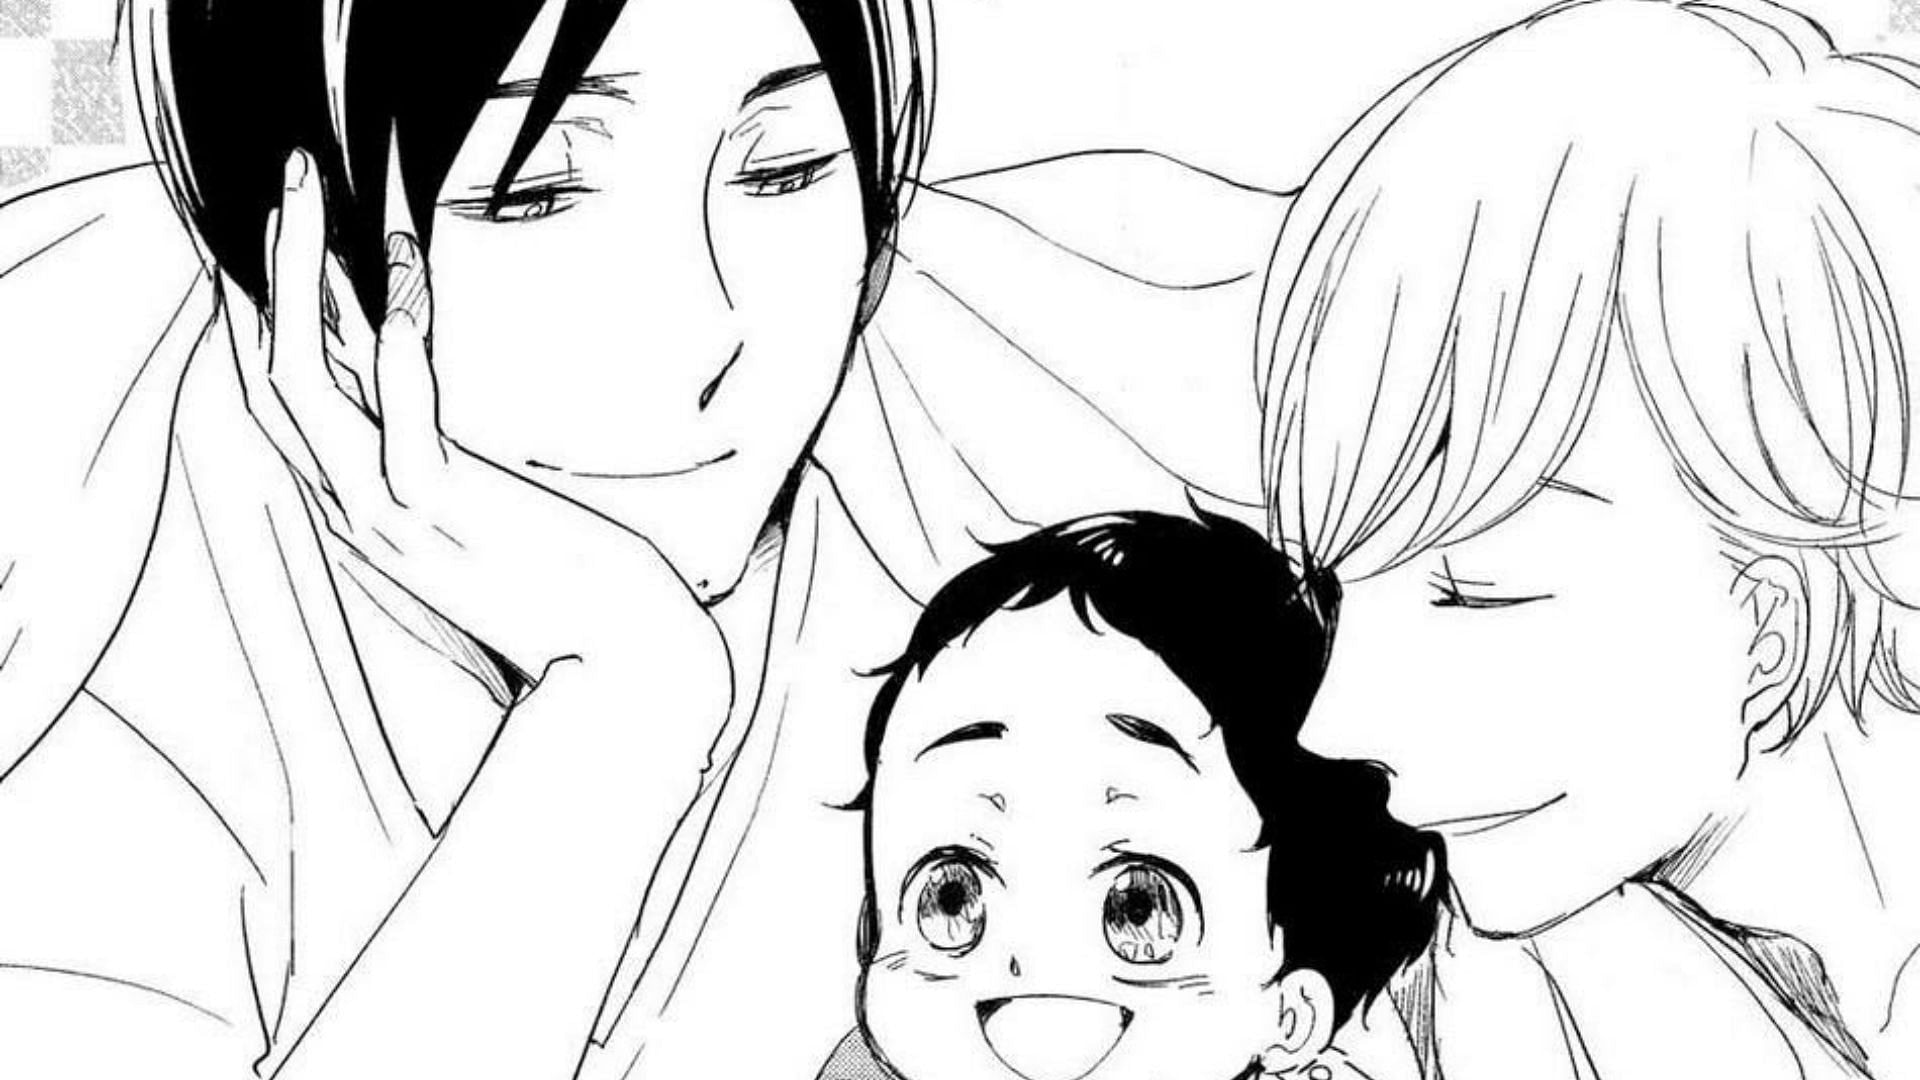 The Fujiyoshi family as seen in the manga (Image via Omegaverse Project)